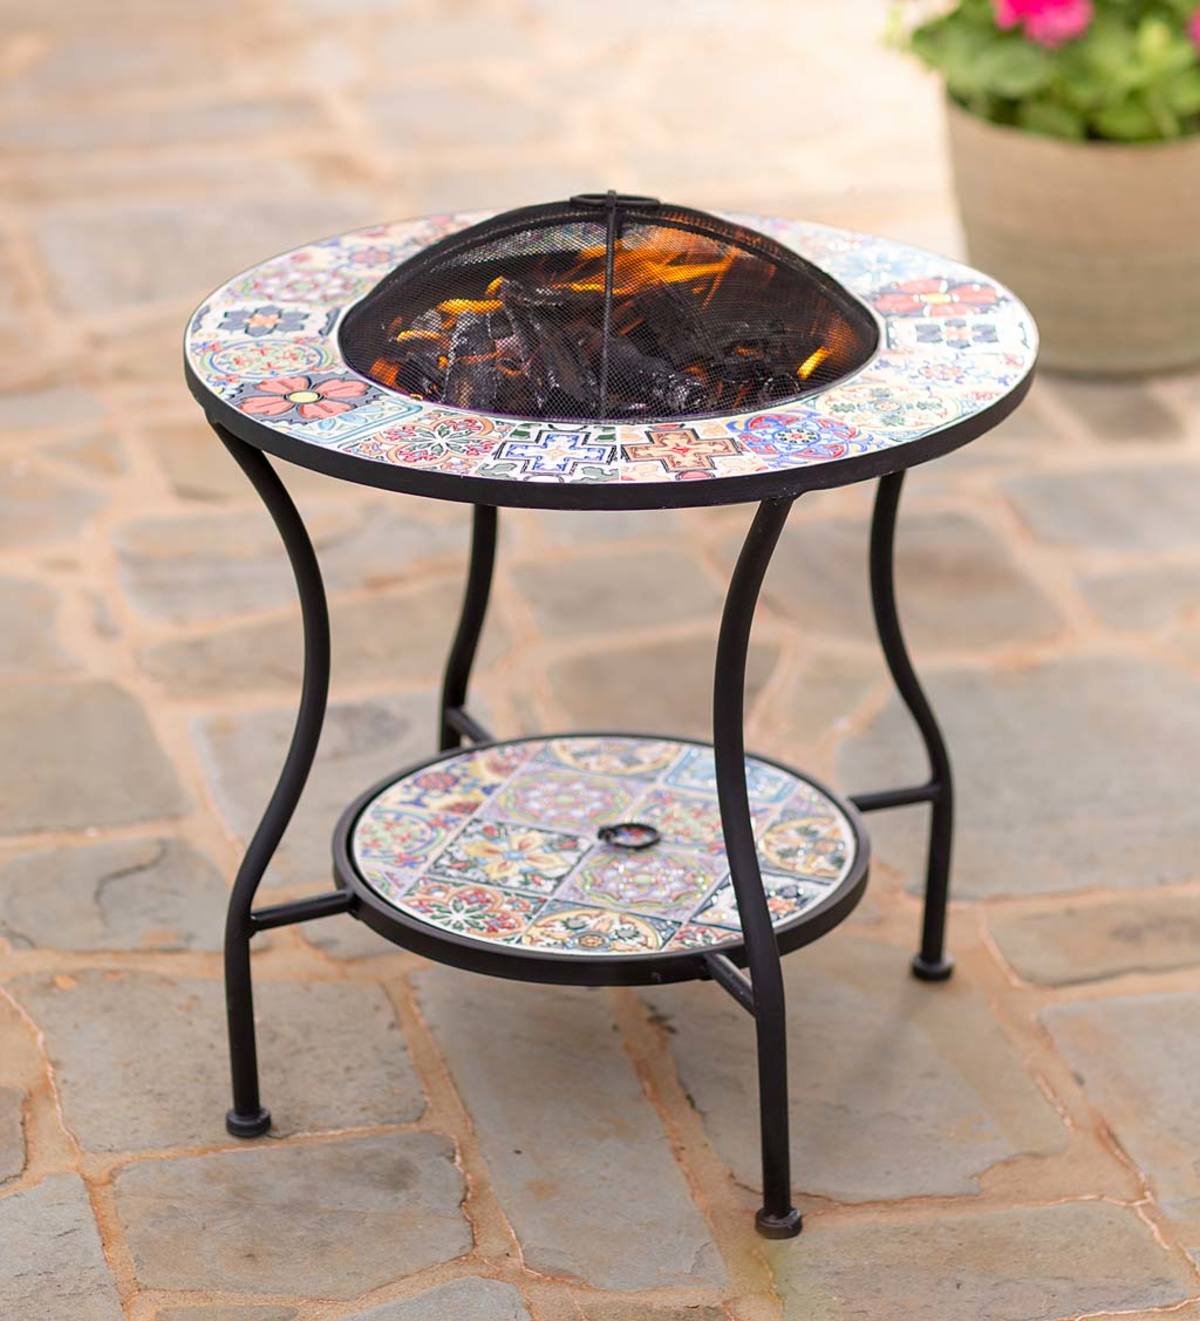 Mosaic Tile Convertible Fire Pit/Side Table | PlowHearth